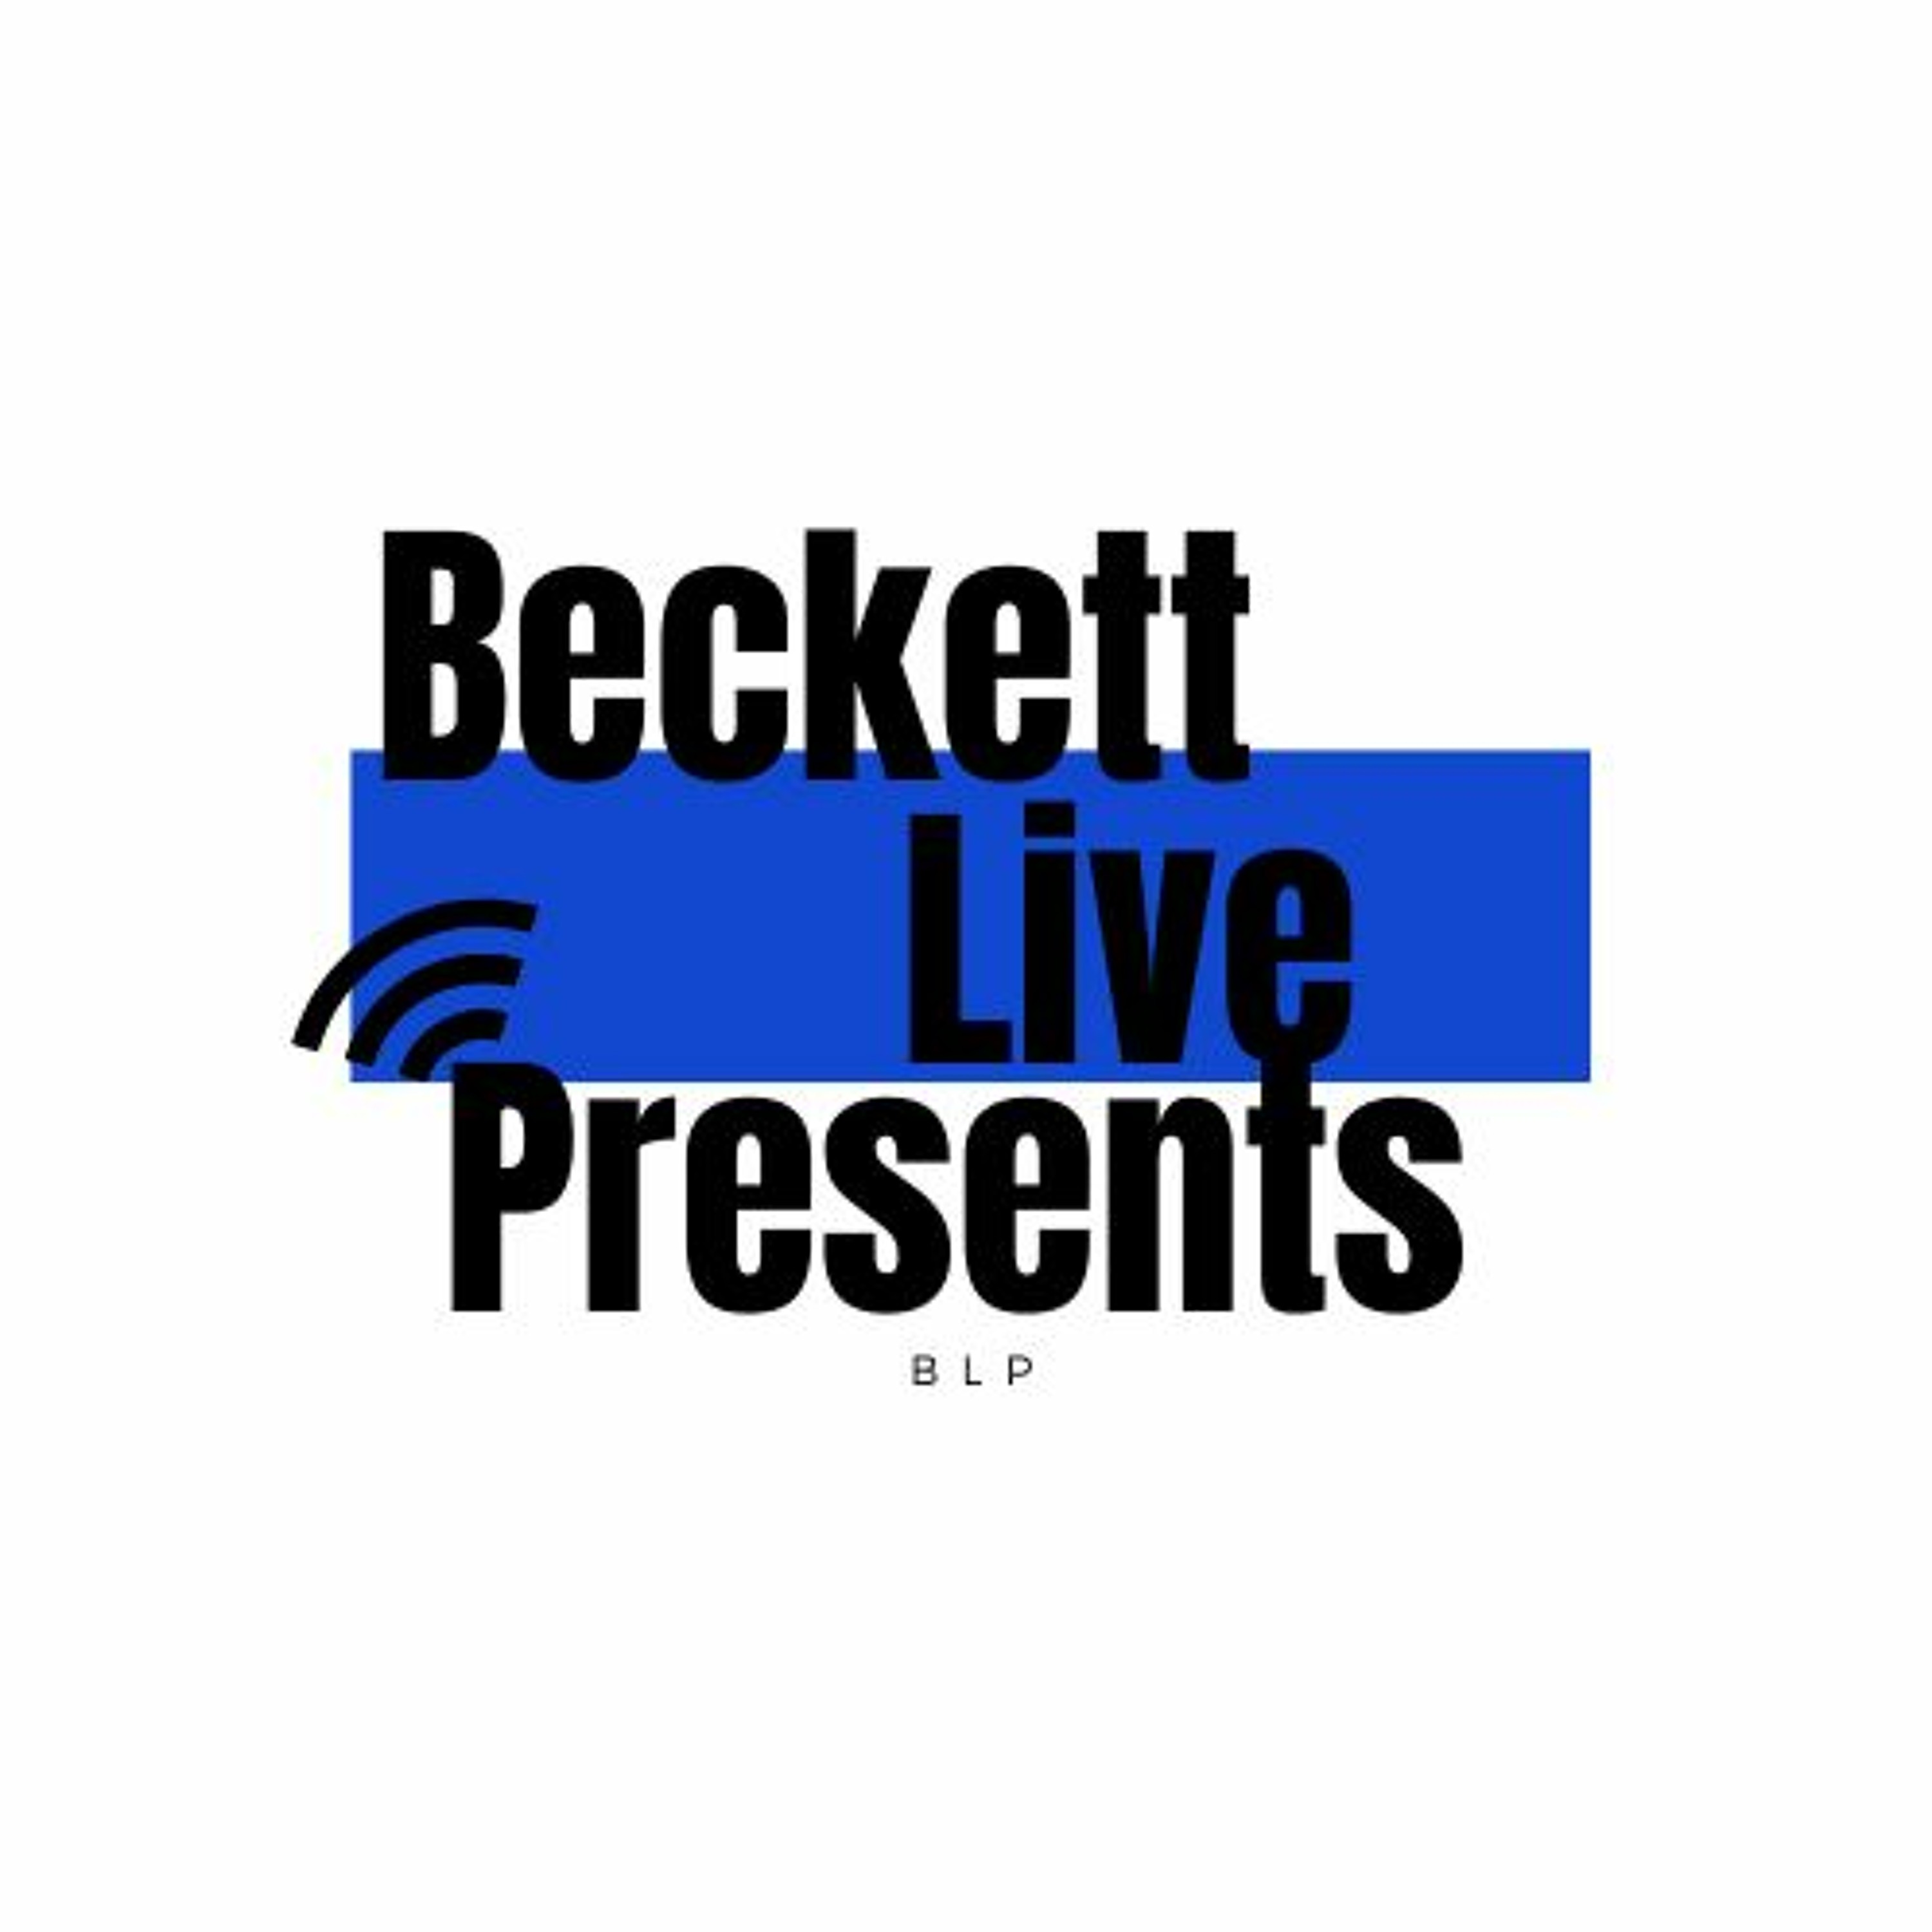 Beckett Live Presents - Panini’s Tracy Hackler